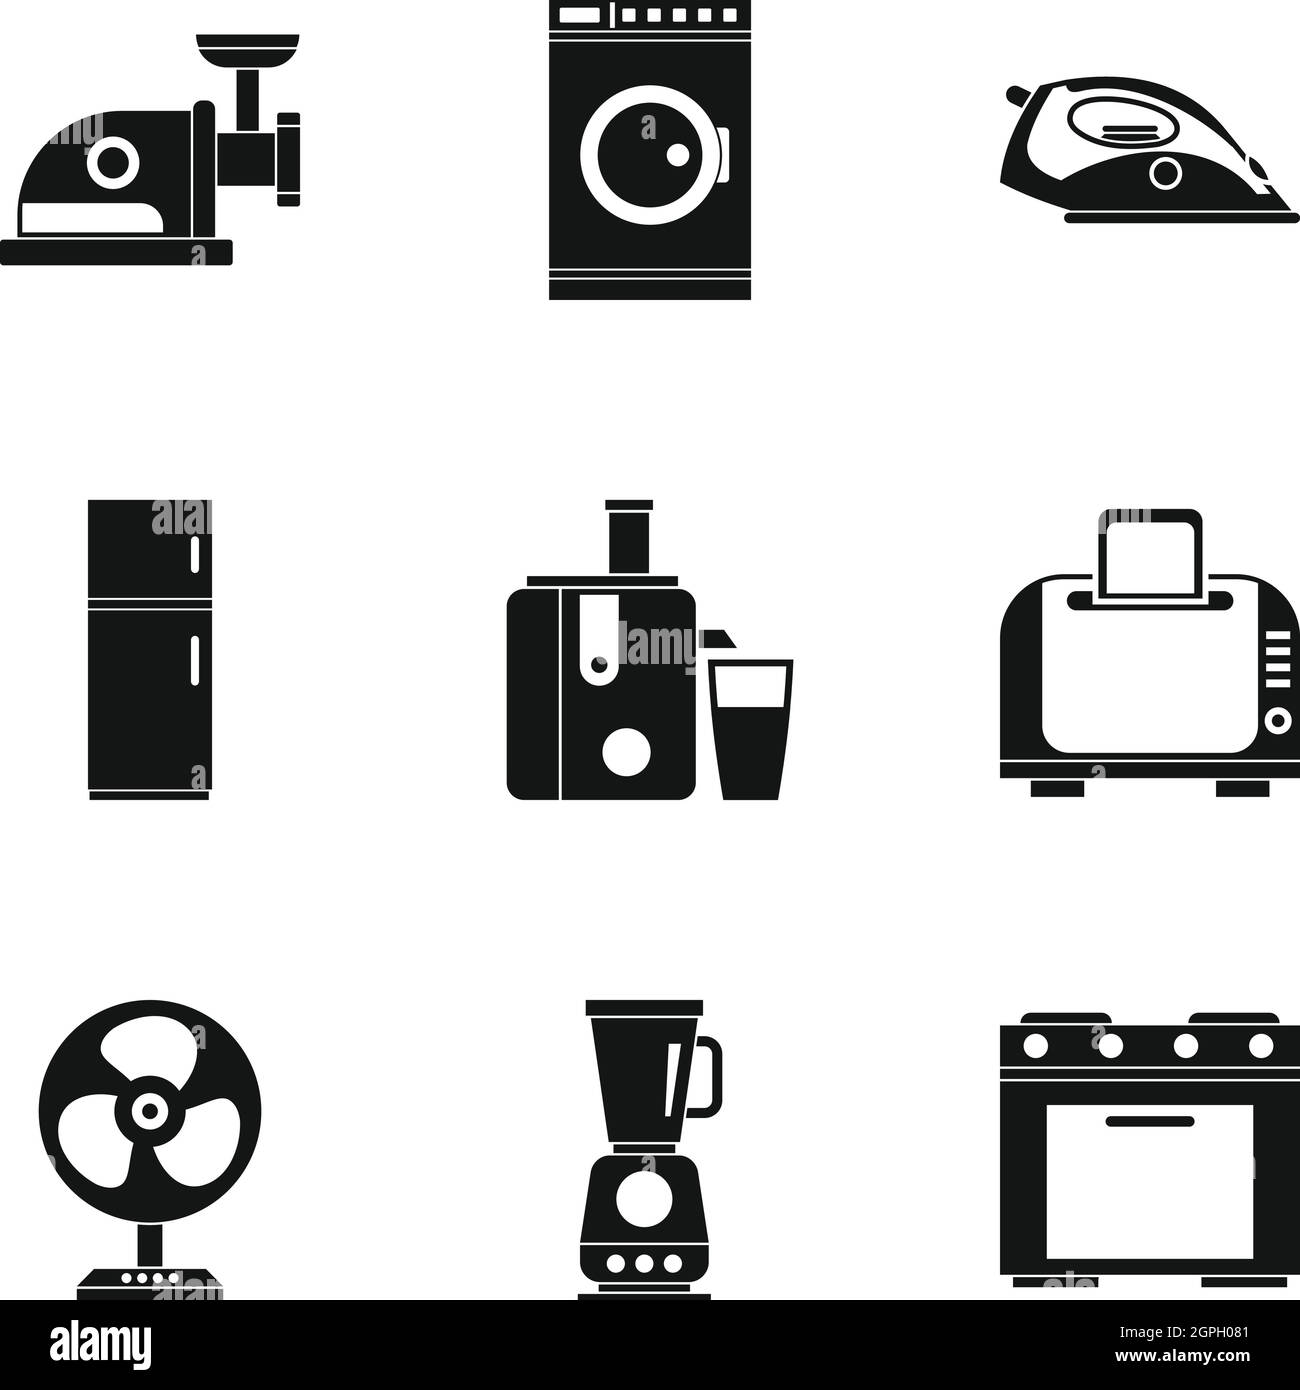 Appliances icons set, simple style Stock Vector